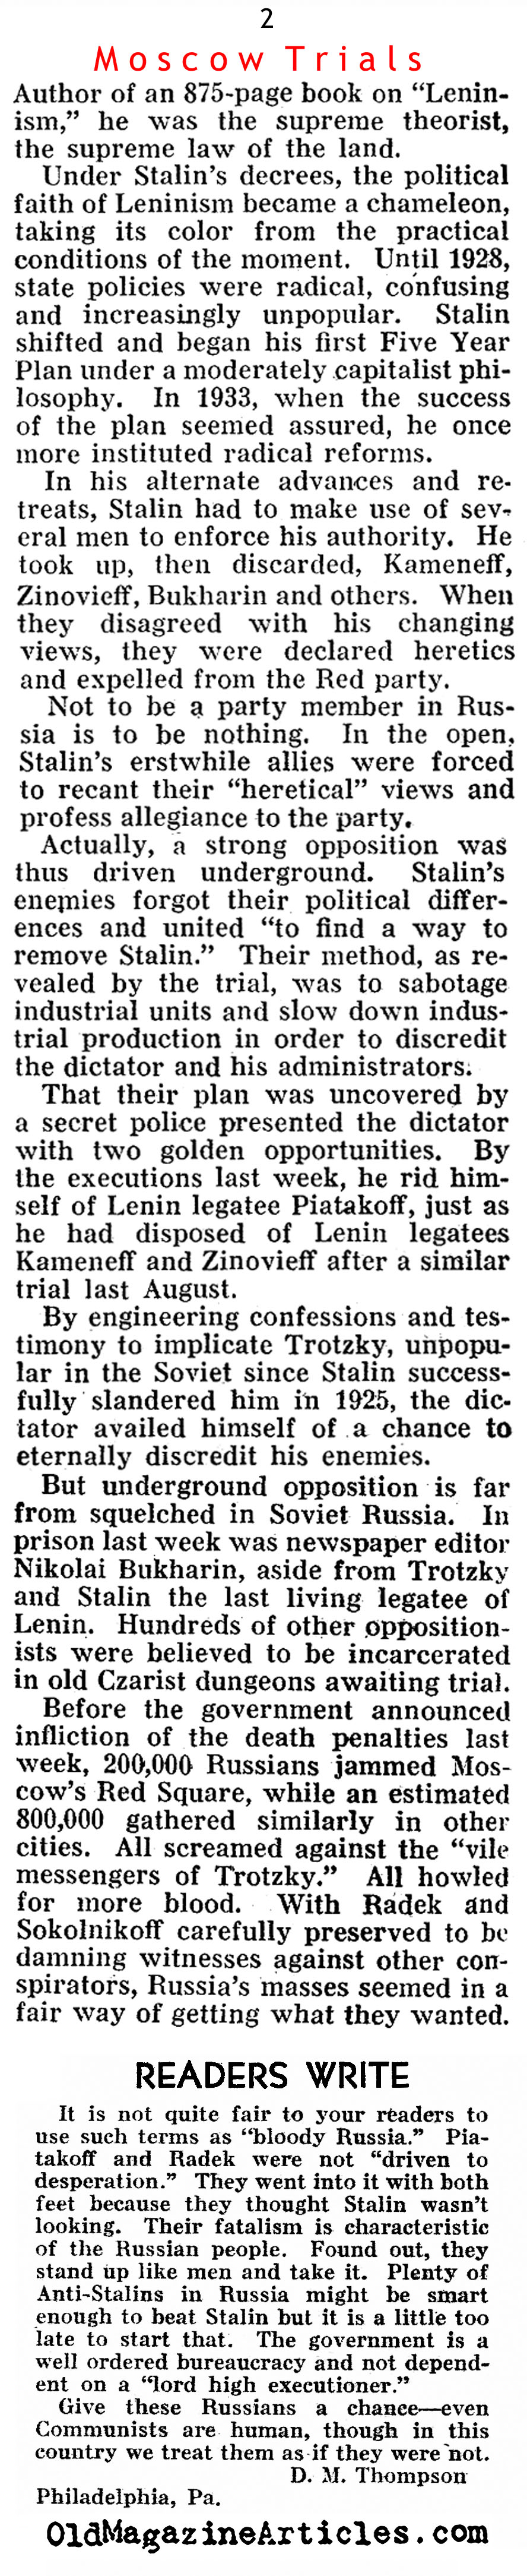 The Moscow Show Trials Continue (Pathfinder Magazine, 1937)